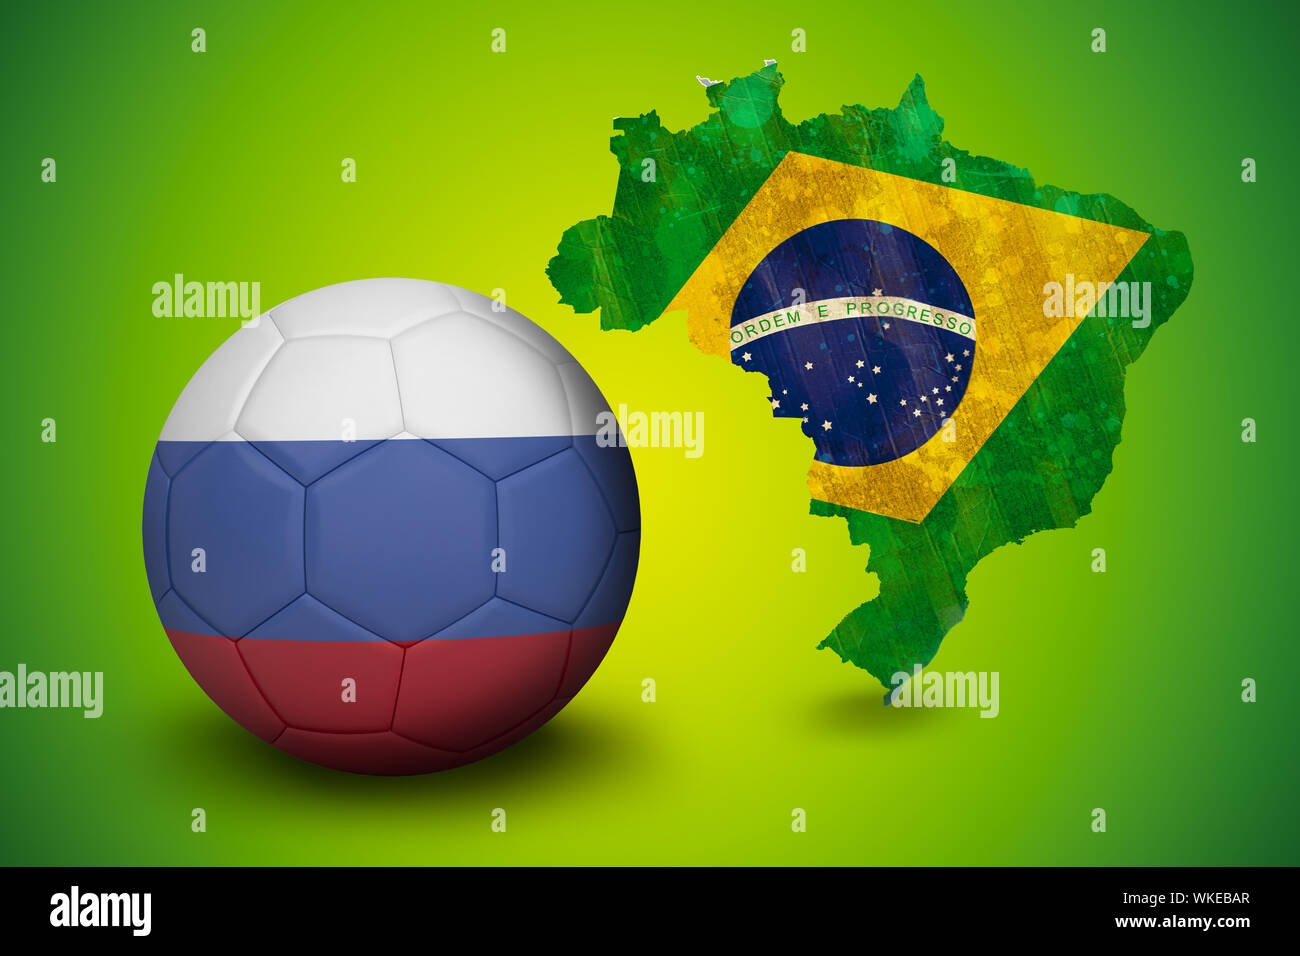 Football in russia colours against green brazil outline with flag Stock Photo